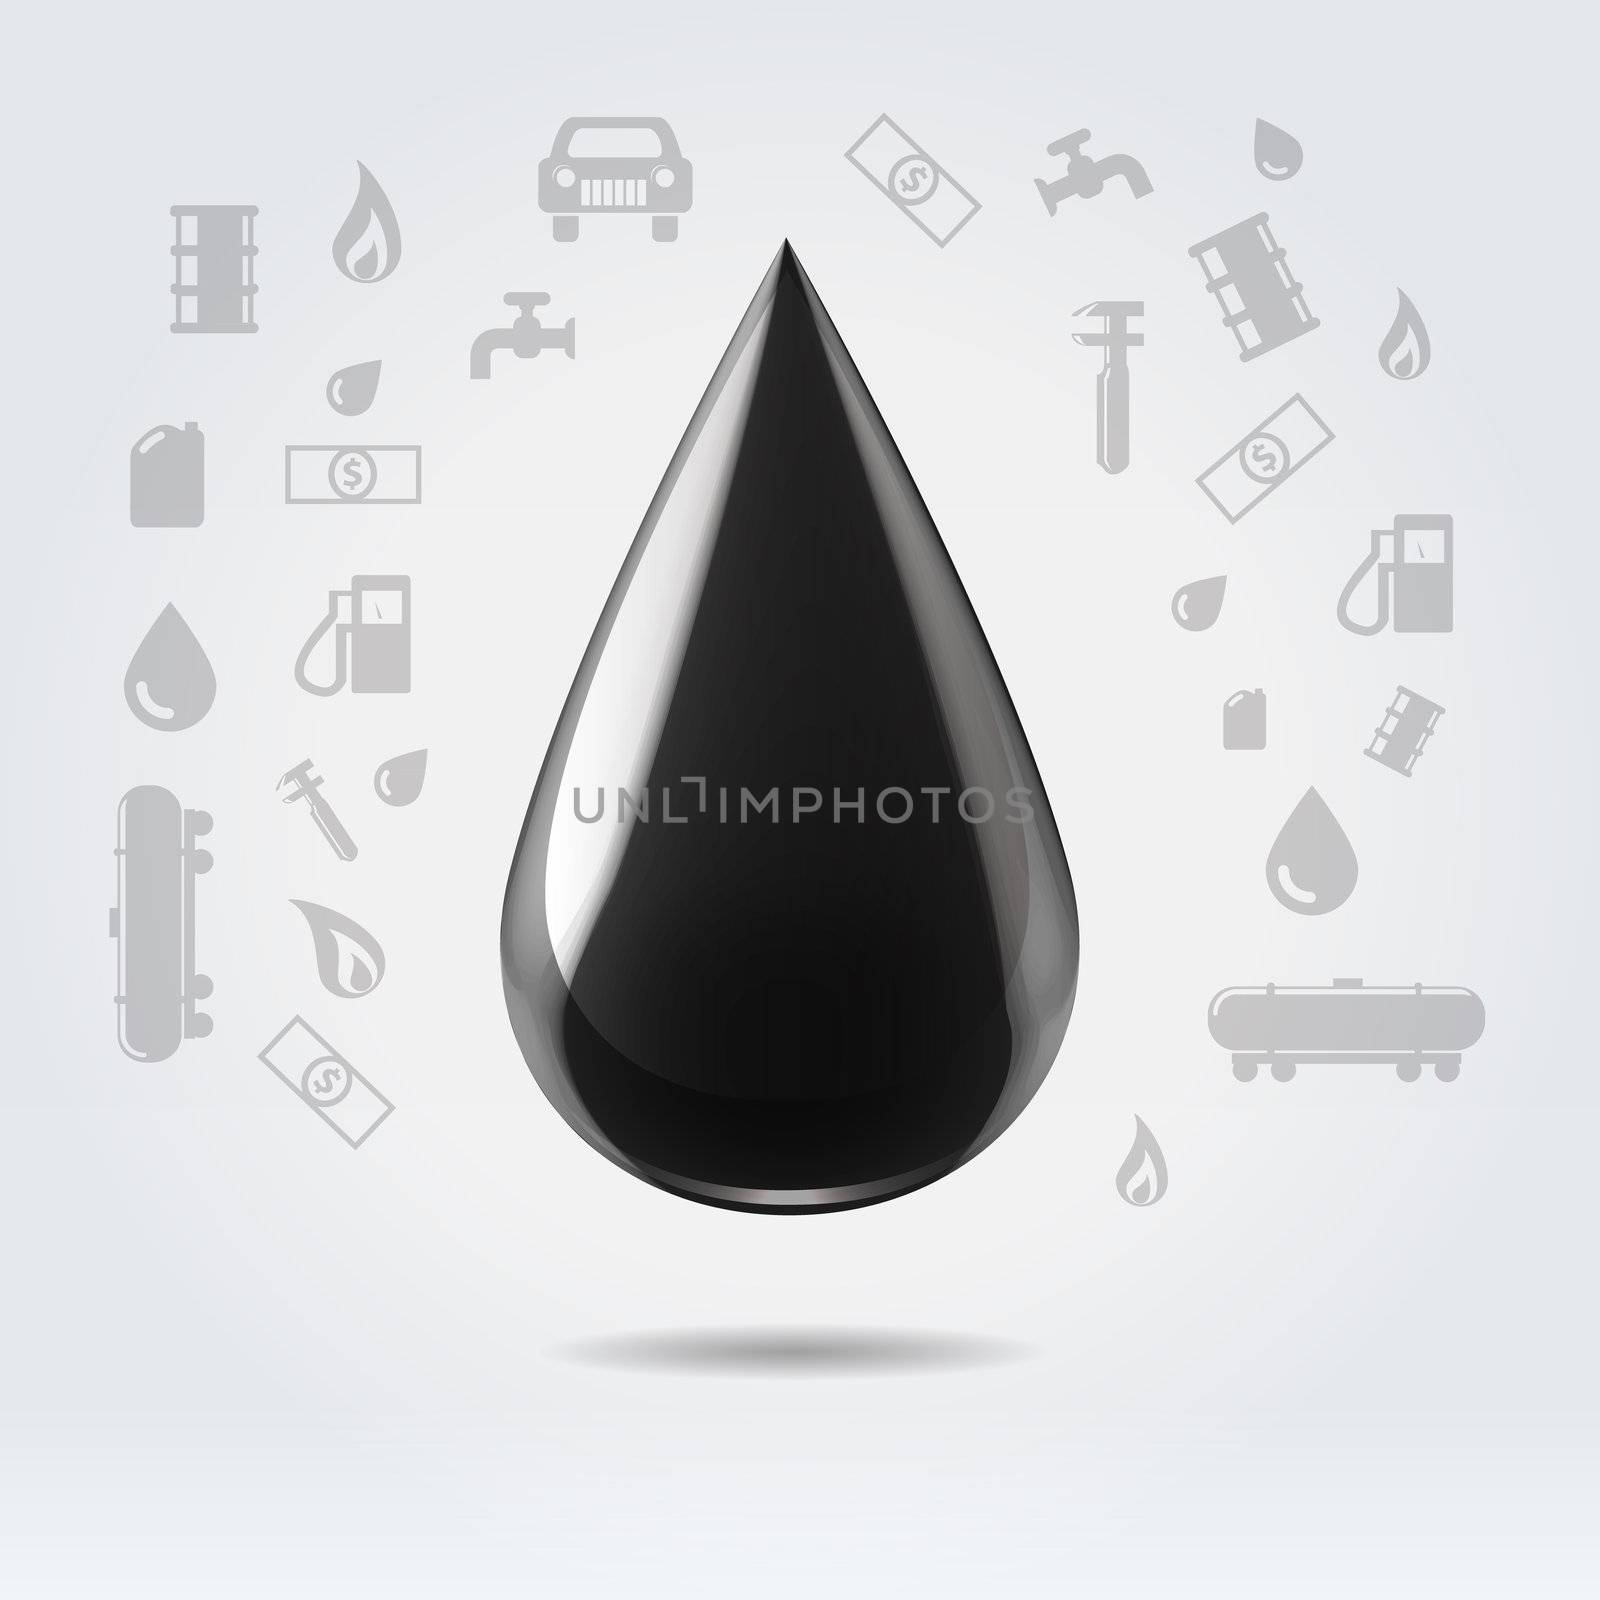 Glossy realistic oil fuel droplet hanging in light space on a symbolistic oil industry icons background